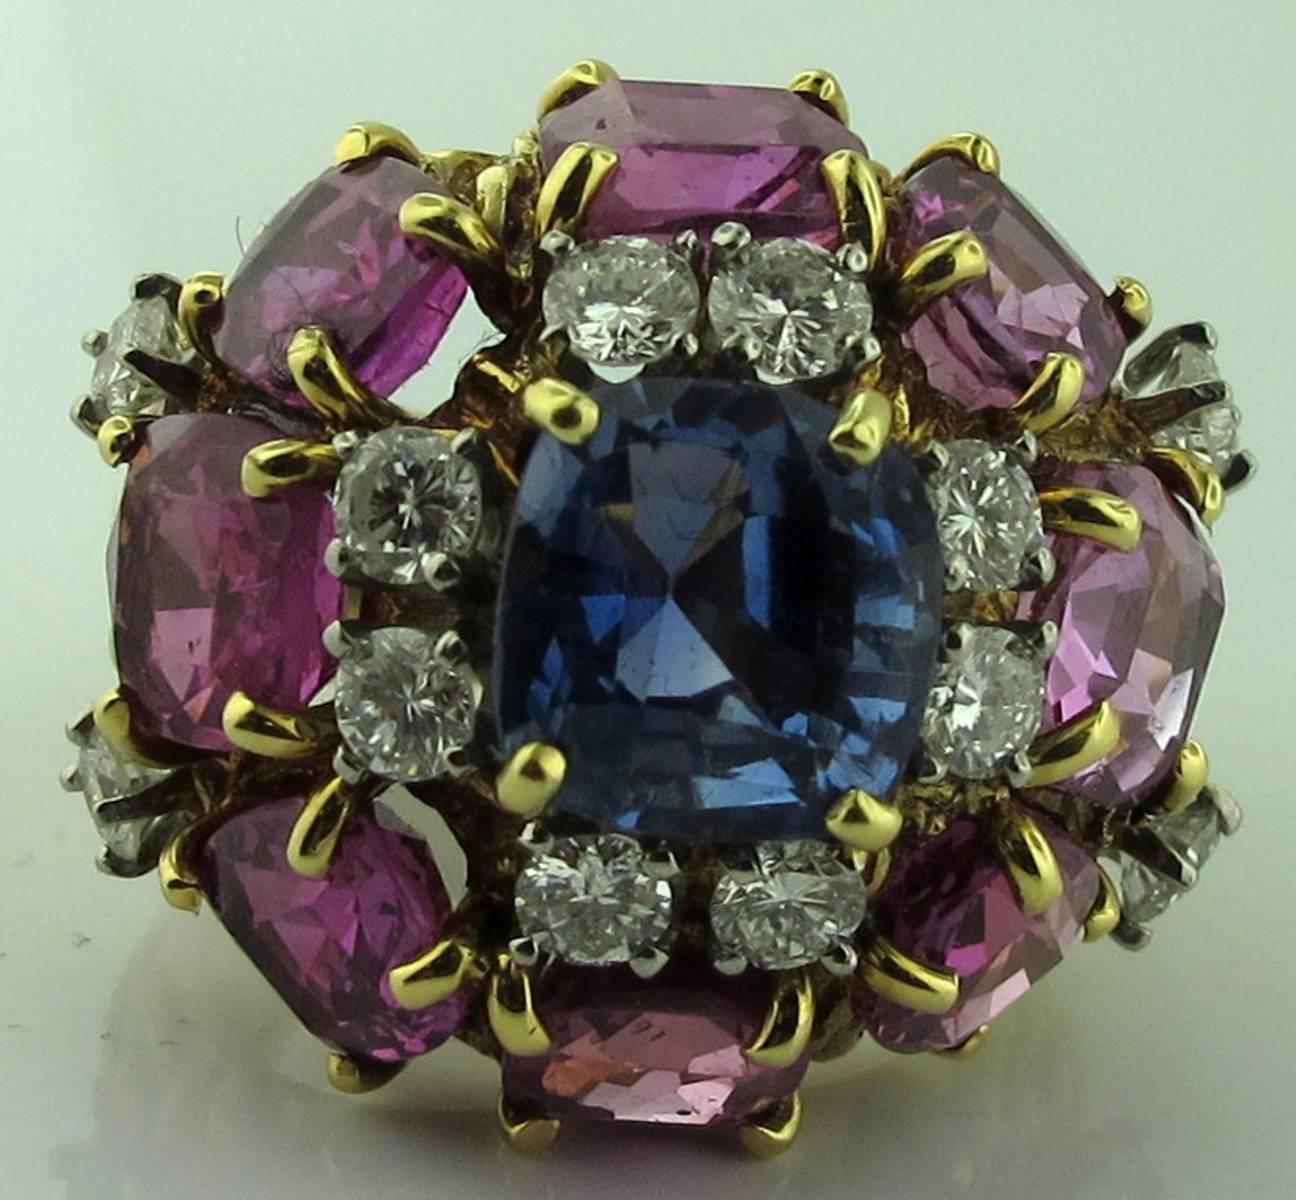 Multi-colored Sapphire Ring with diamonds.  Set in 18 karat yellow gold.  Center Cushion Cut Blue Sapphire is 3.00 carats.  There are 8 Pink Sapphires that weigh 10.00 carats in total.  There are 12 Round Brilliant diamonds weighing 2.00 carats. 